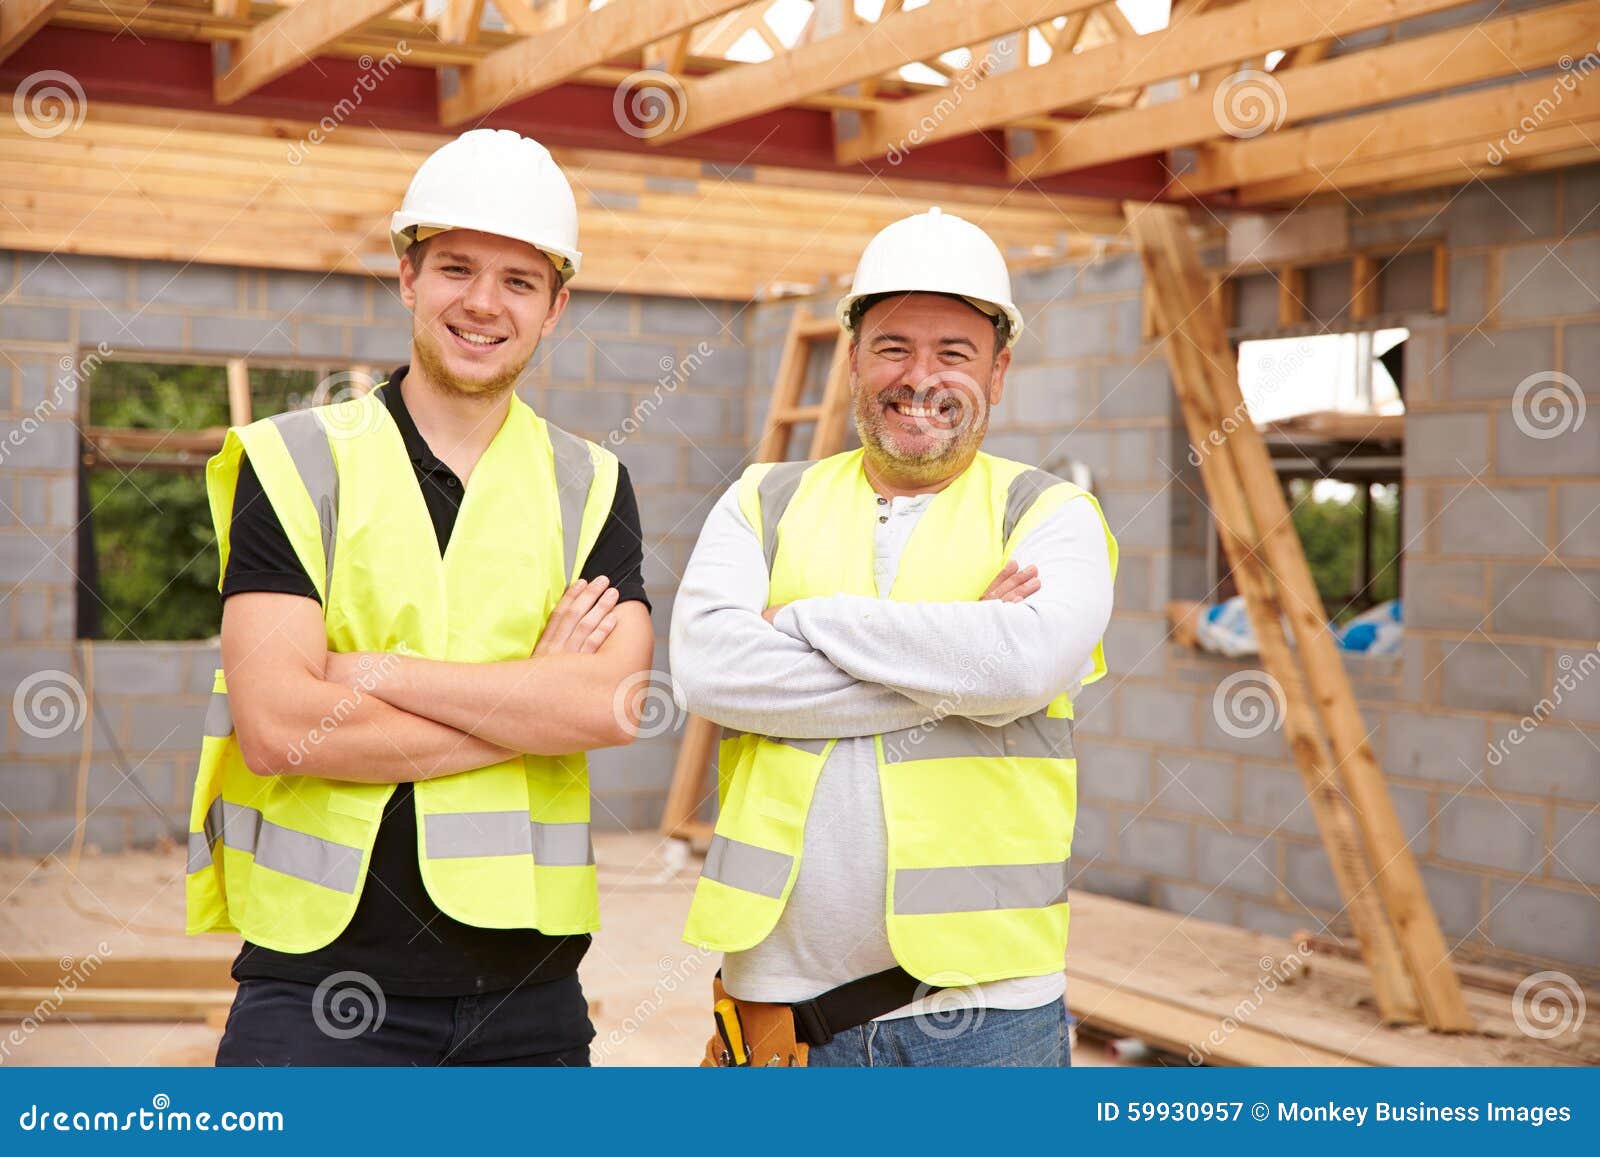 Portrait Of Carpenter With Apprentice Working On Site ...